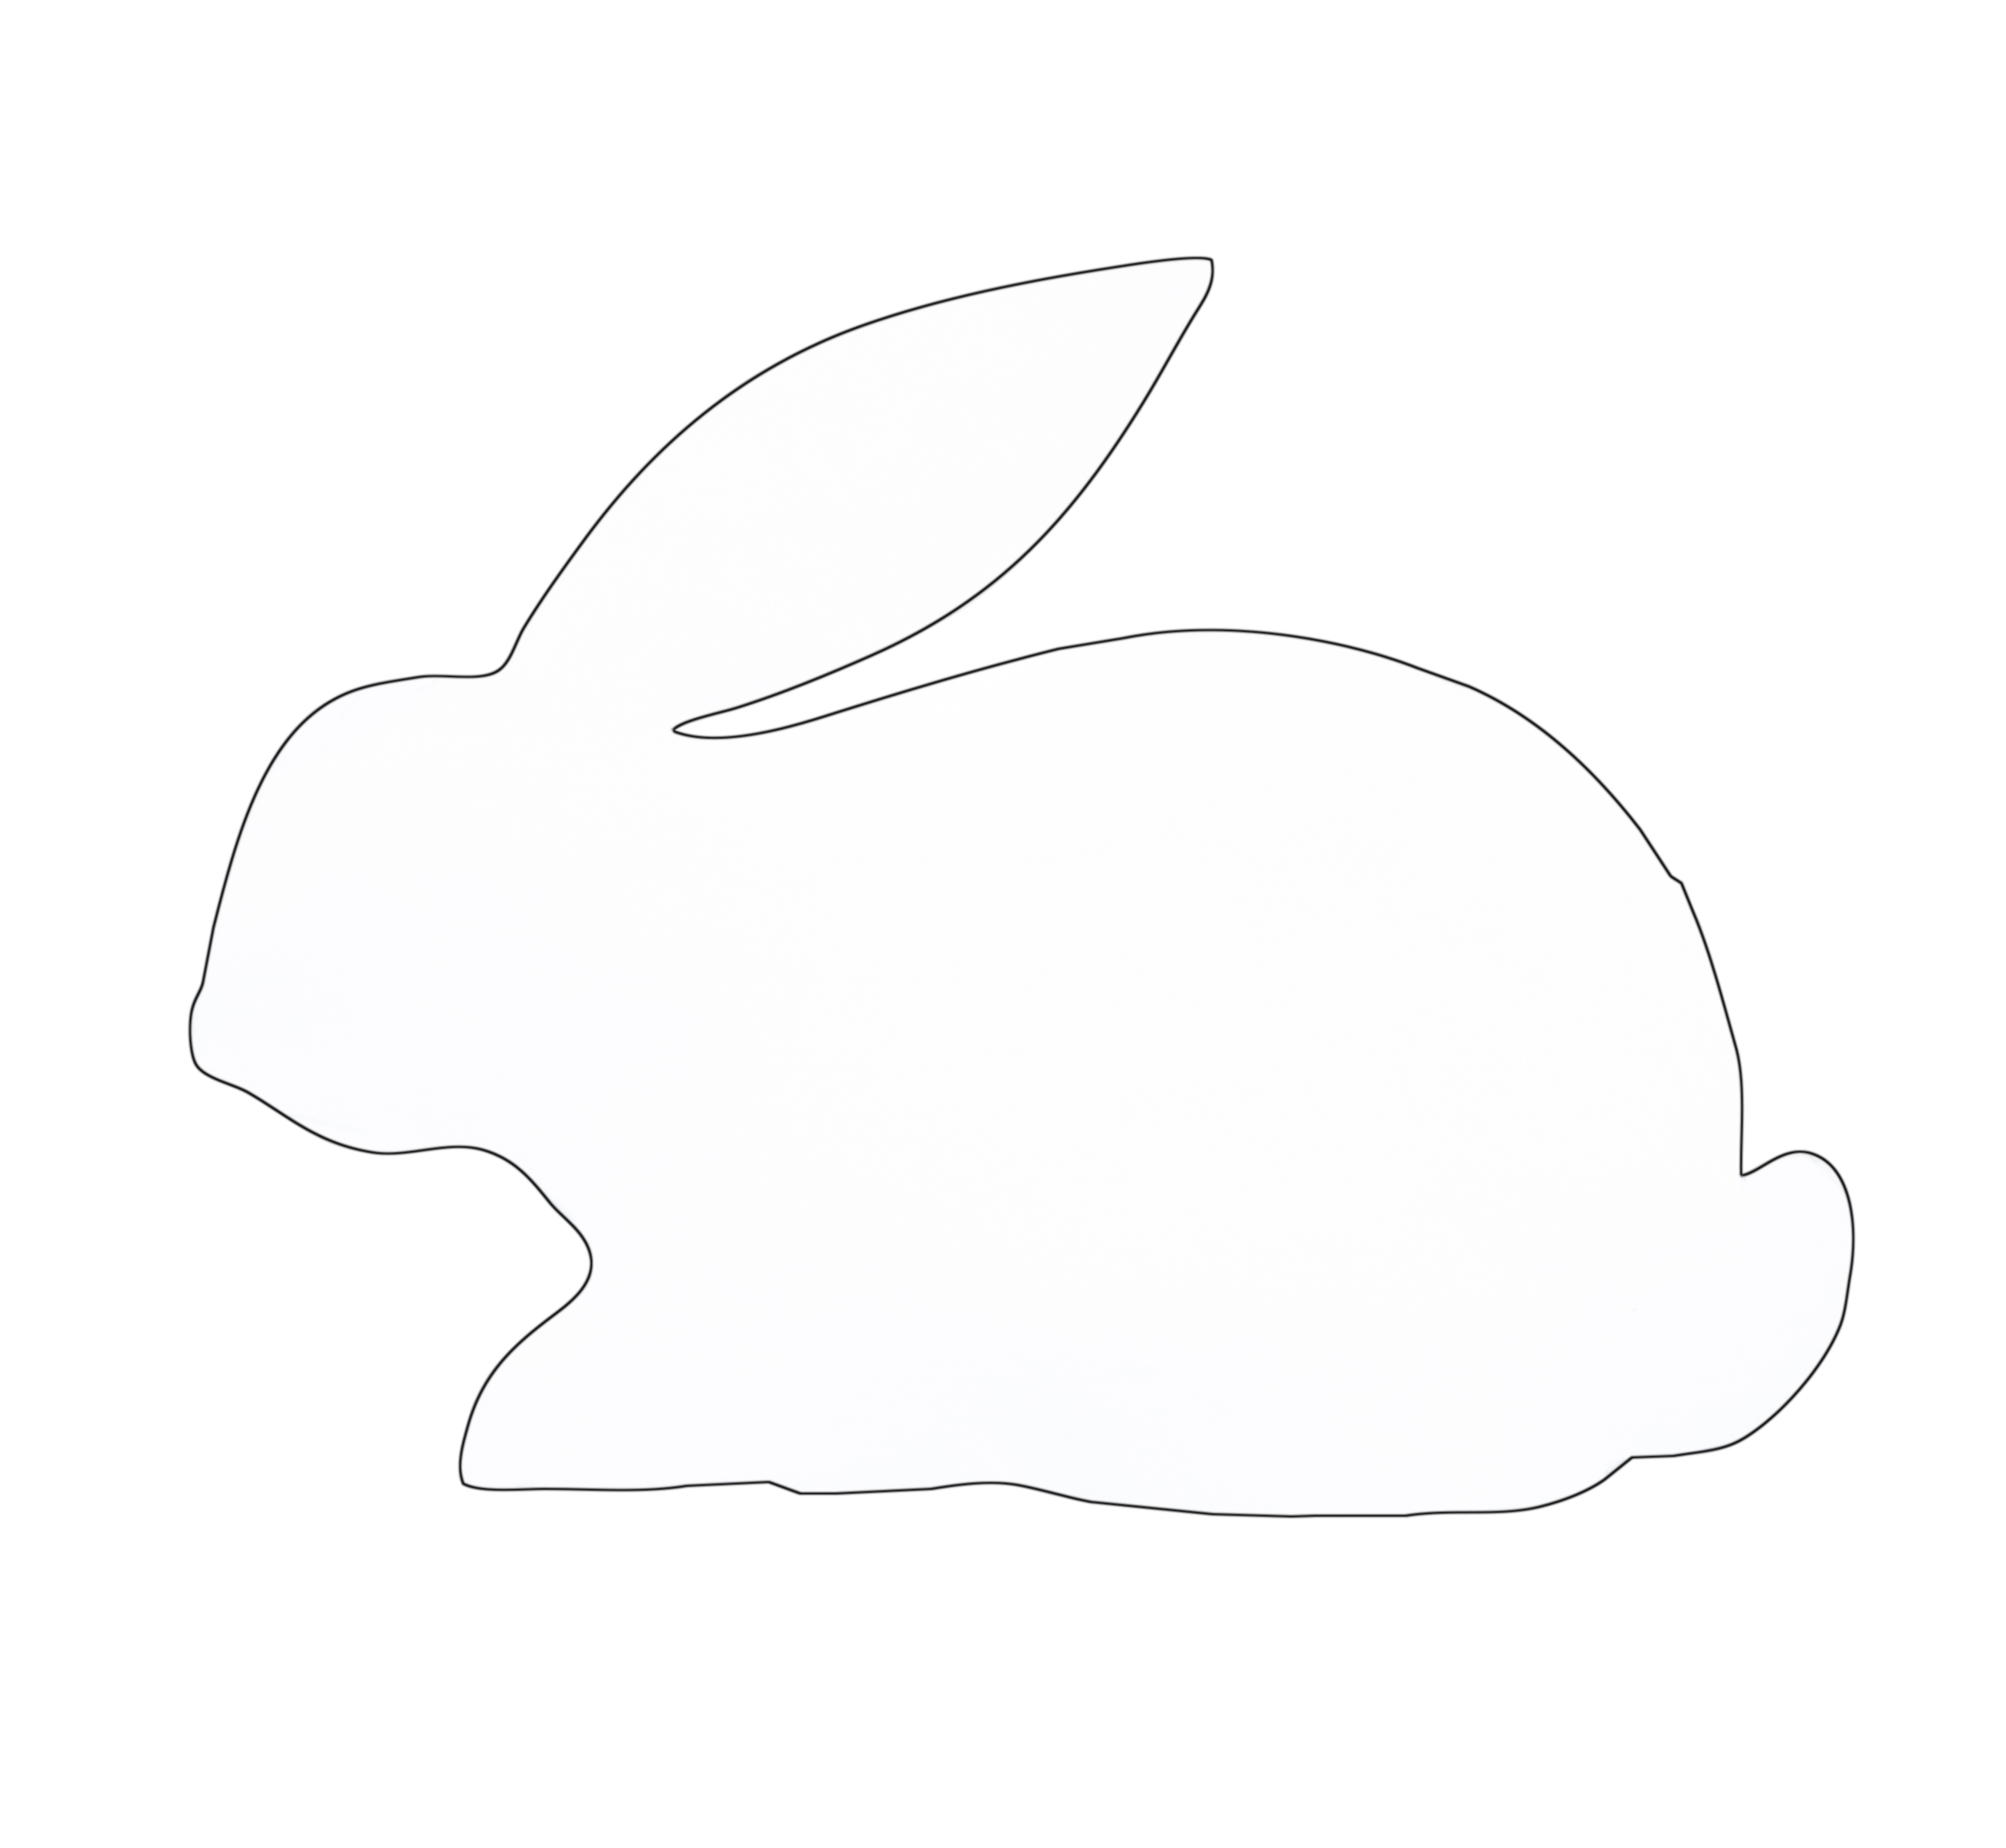 Free bunny outline.